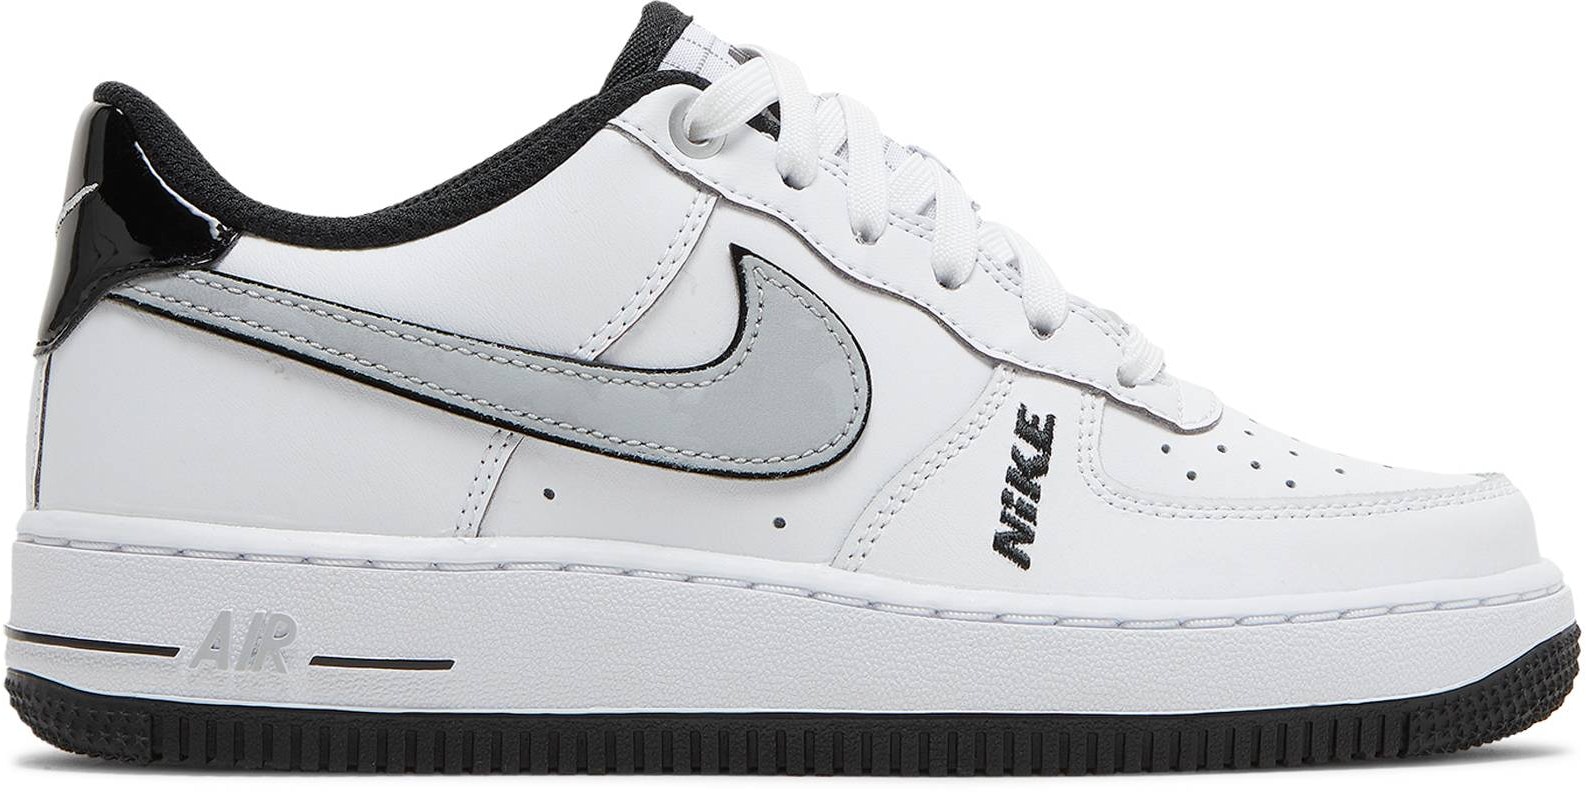 Nike Air Force 1 Low LV8 White Wolf Grey (GS)